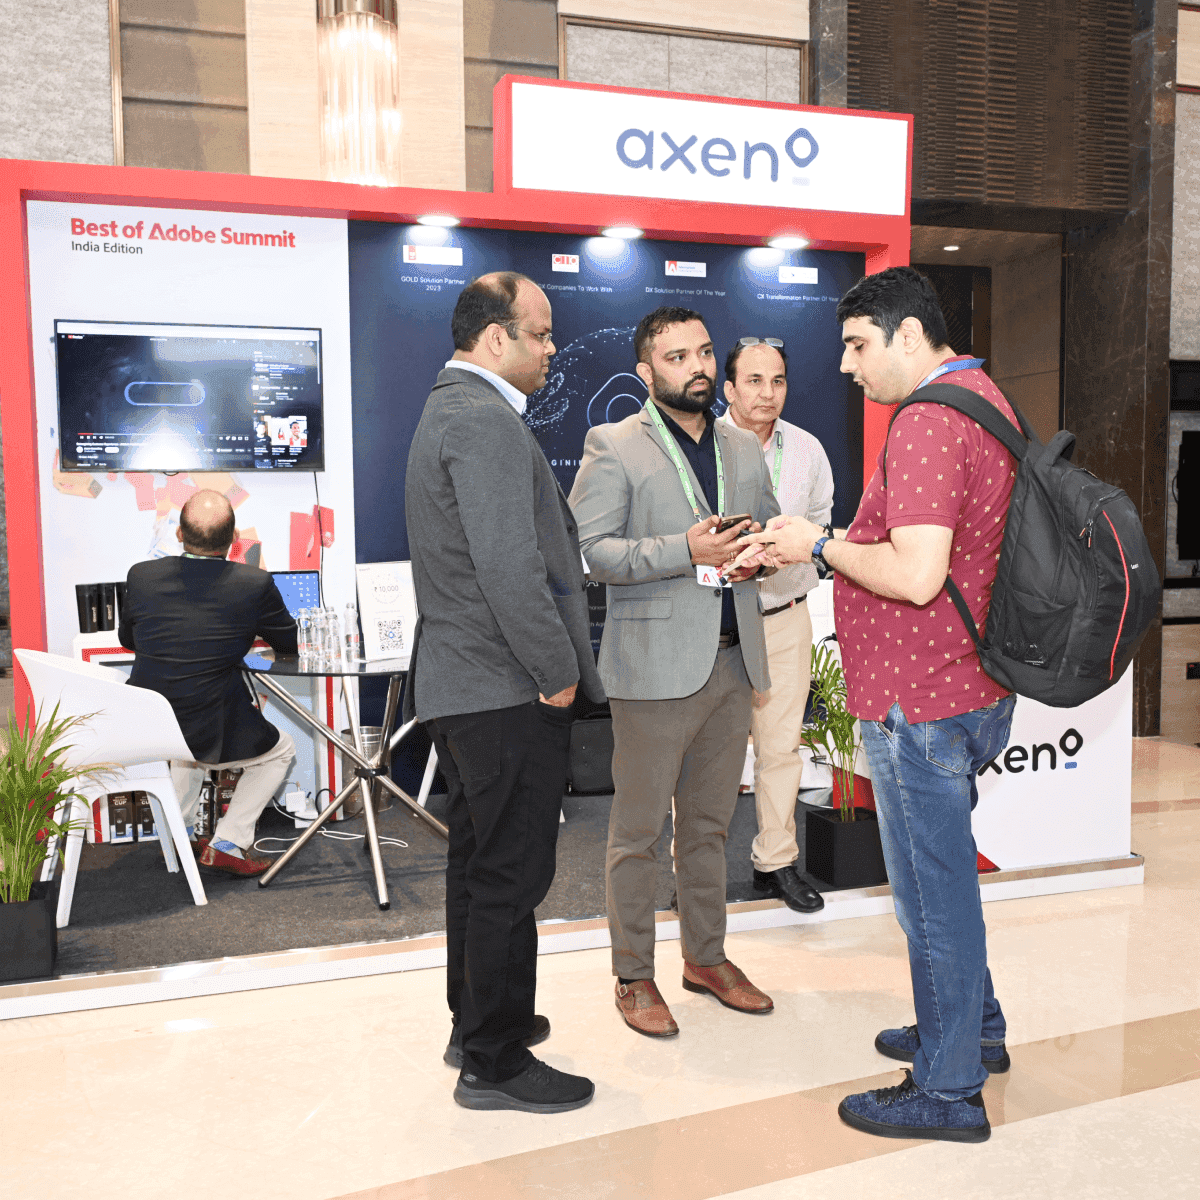 Networking and Axeno's Shining Presence